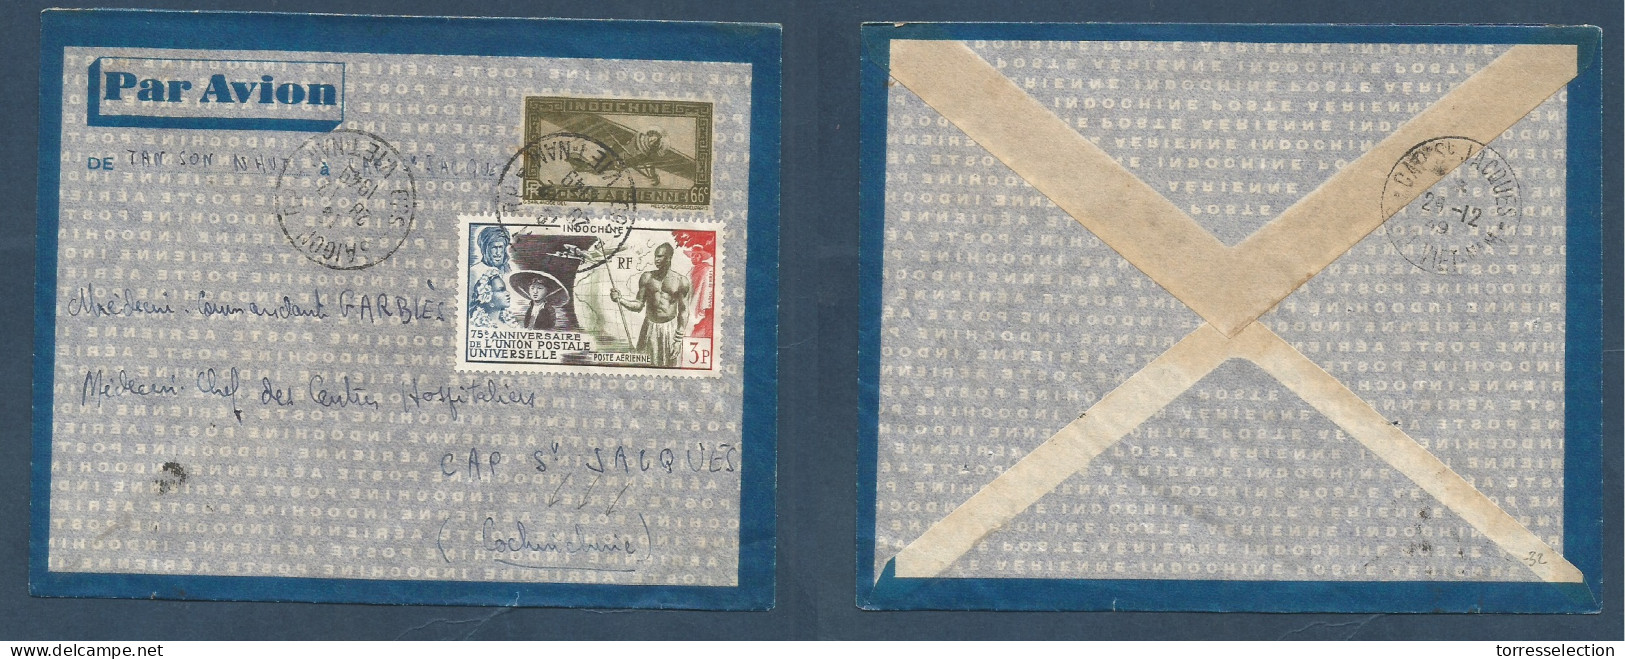 INDOCHINA. 1949 (28 Dec) Saigon - Cap St. Jacques. Air Fkd 66c Stationary Envelope + 3p Tied Cds. UPU Issues. Fine Usage - Asia (Other)